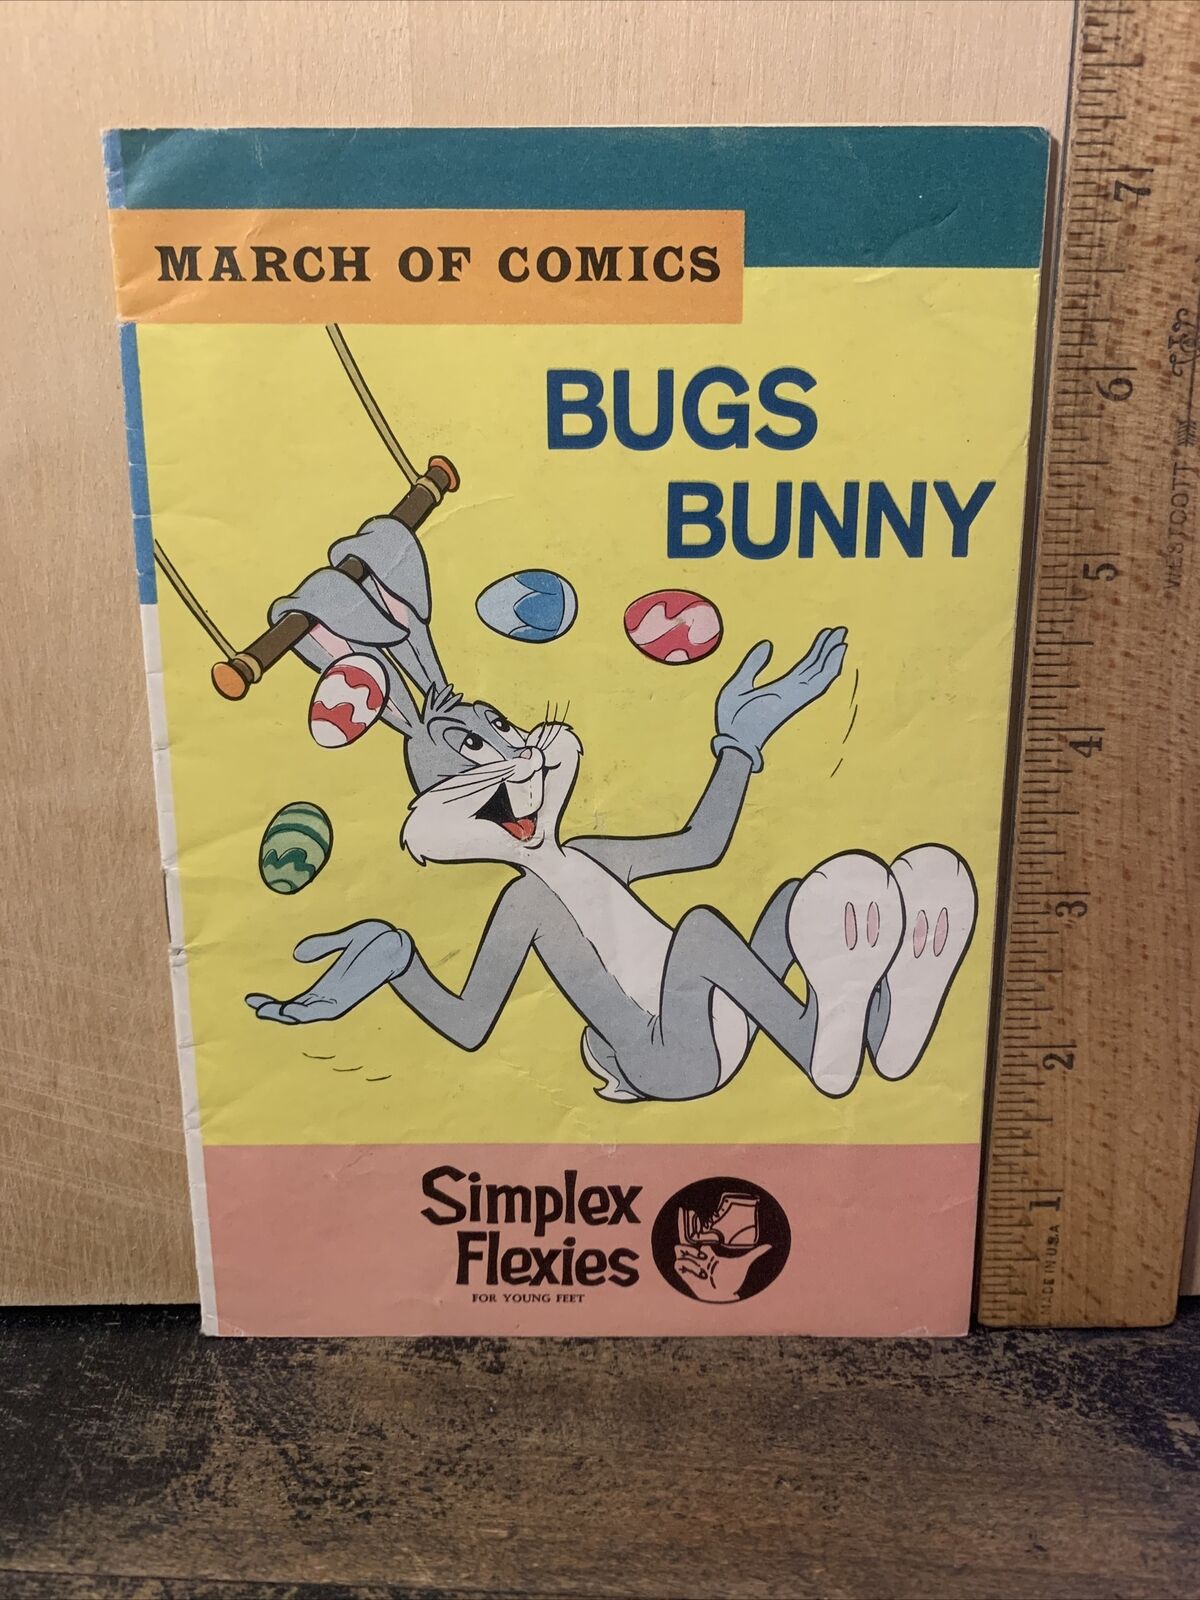 1965 March Of Comics Bugs Bunny #273, Promotional Giveaway Simplex Flexies.￼